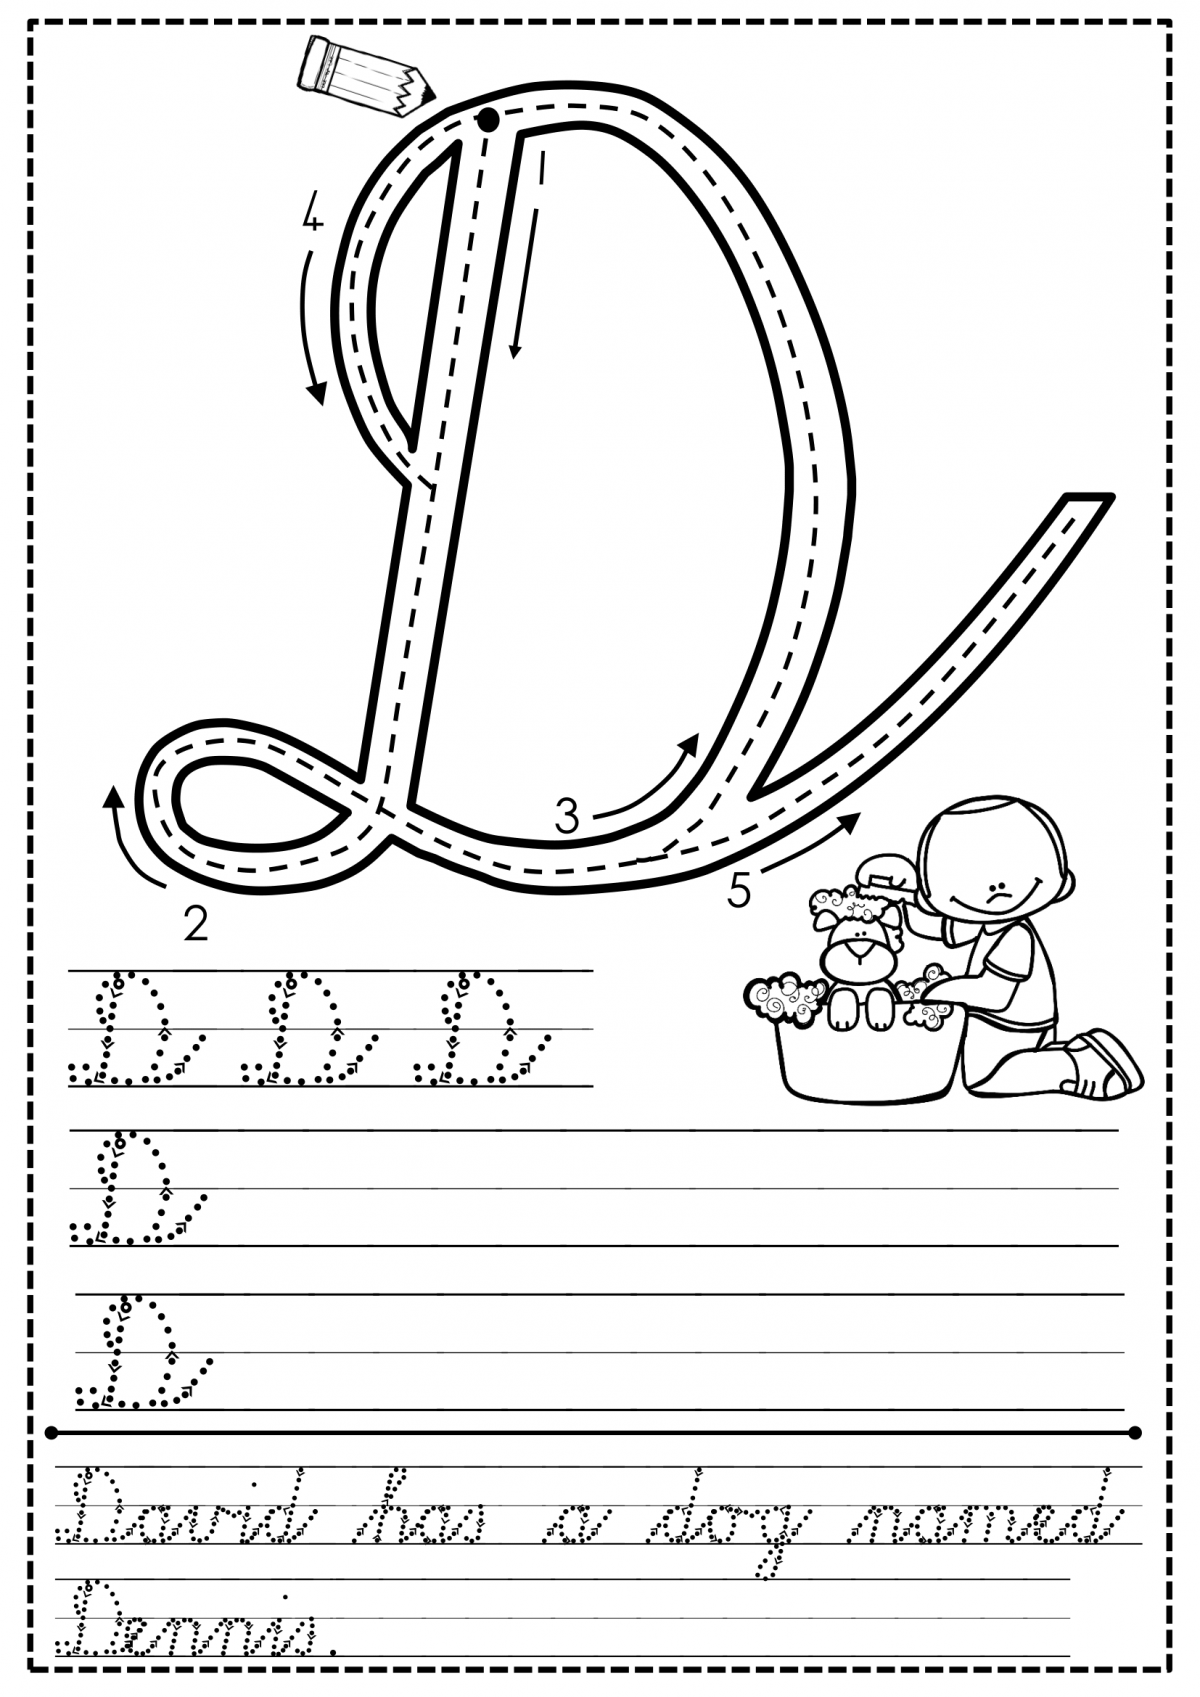 Capital Letters Cursive Writing Worksheets